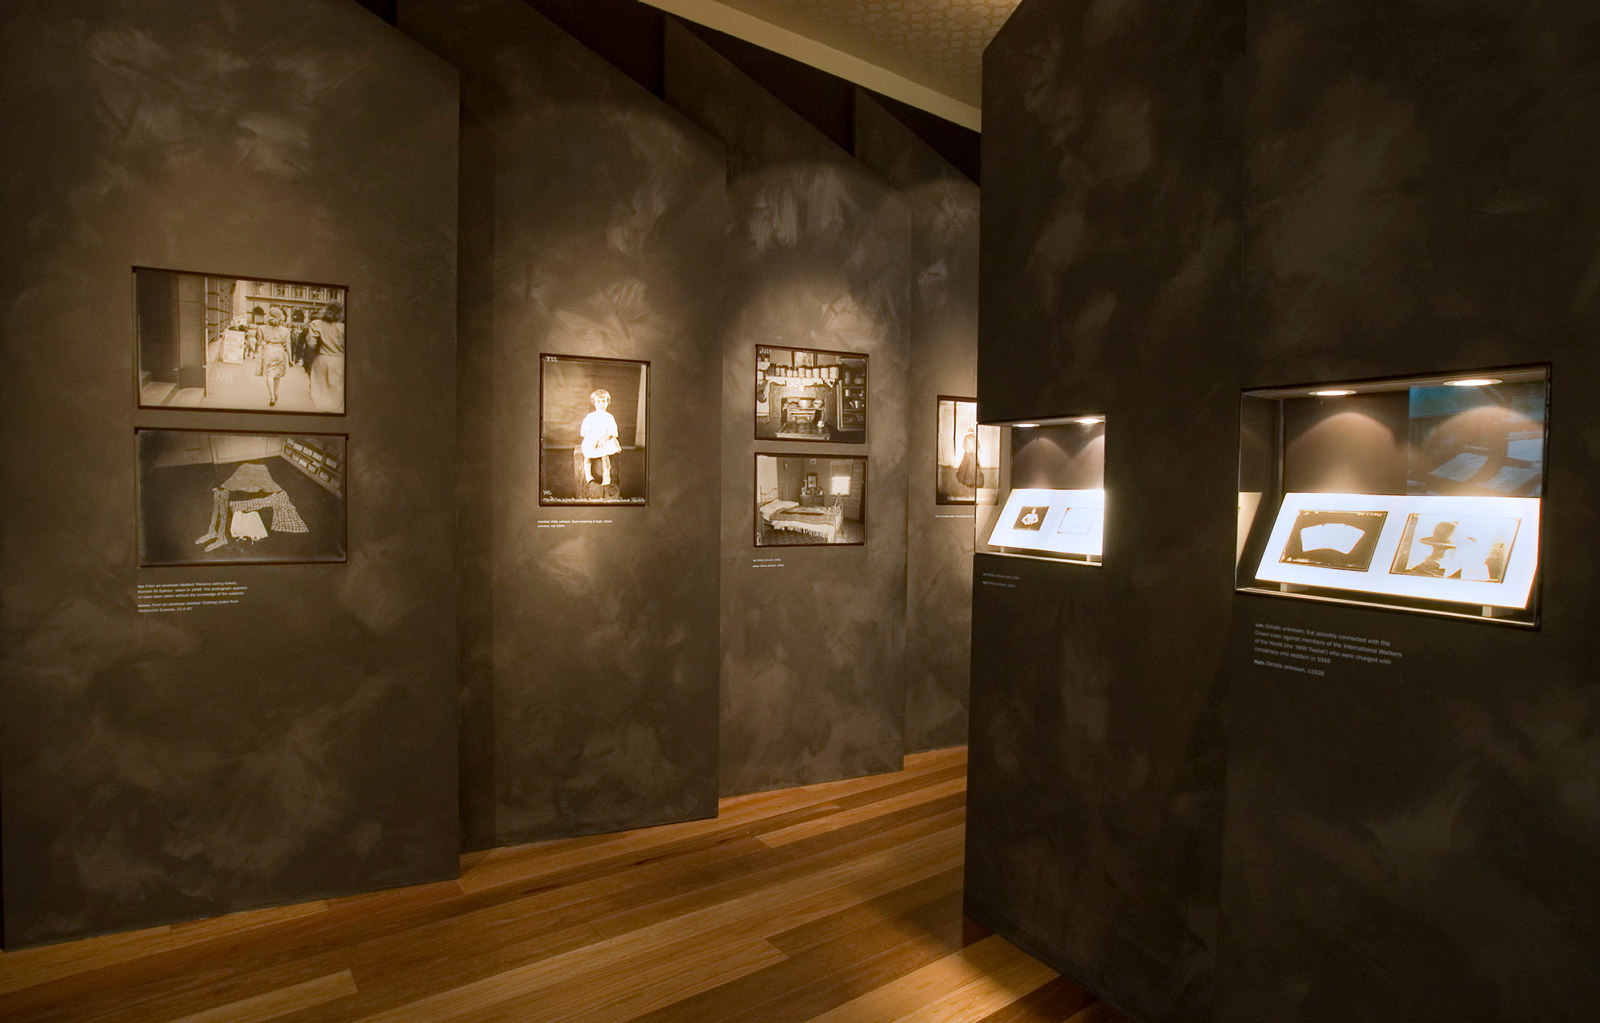 City of shadows installation view